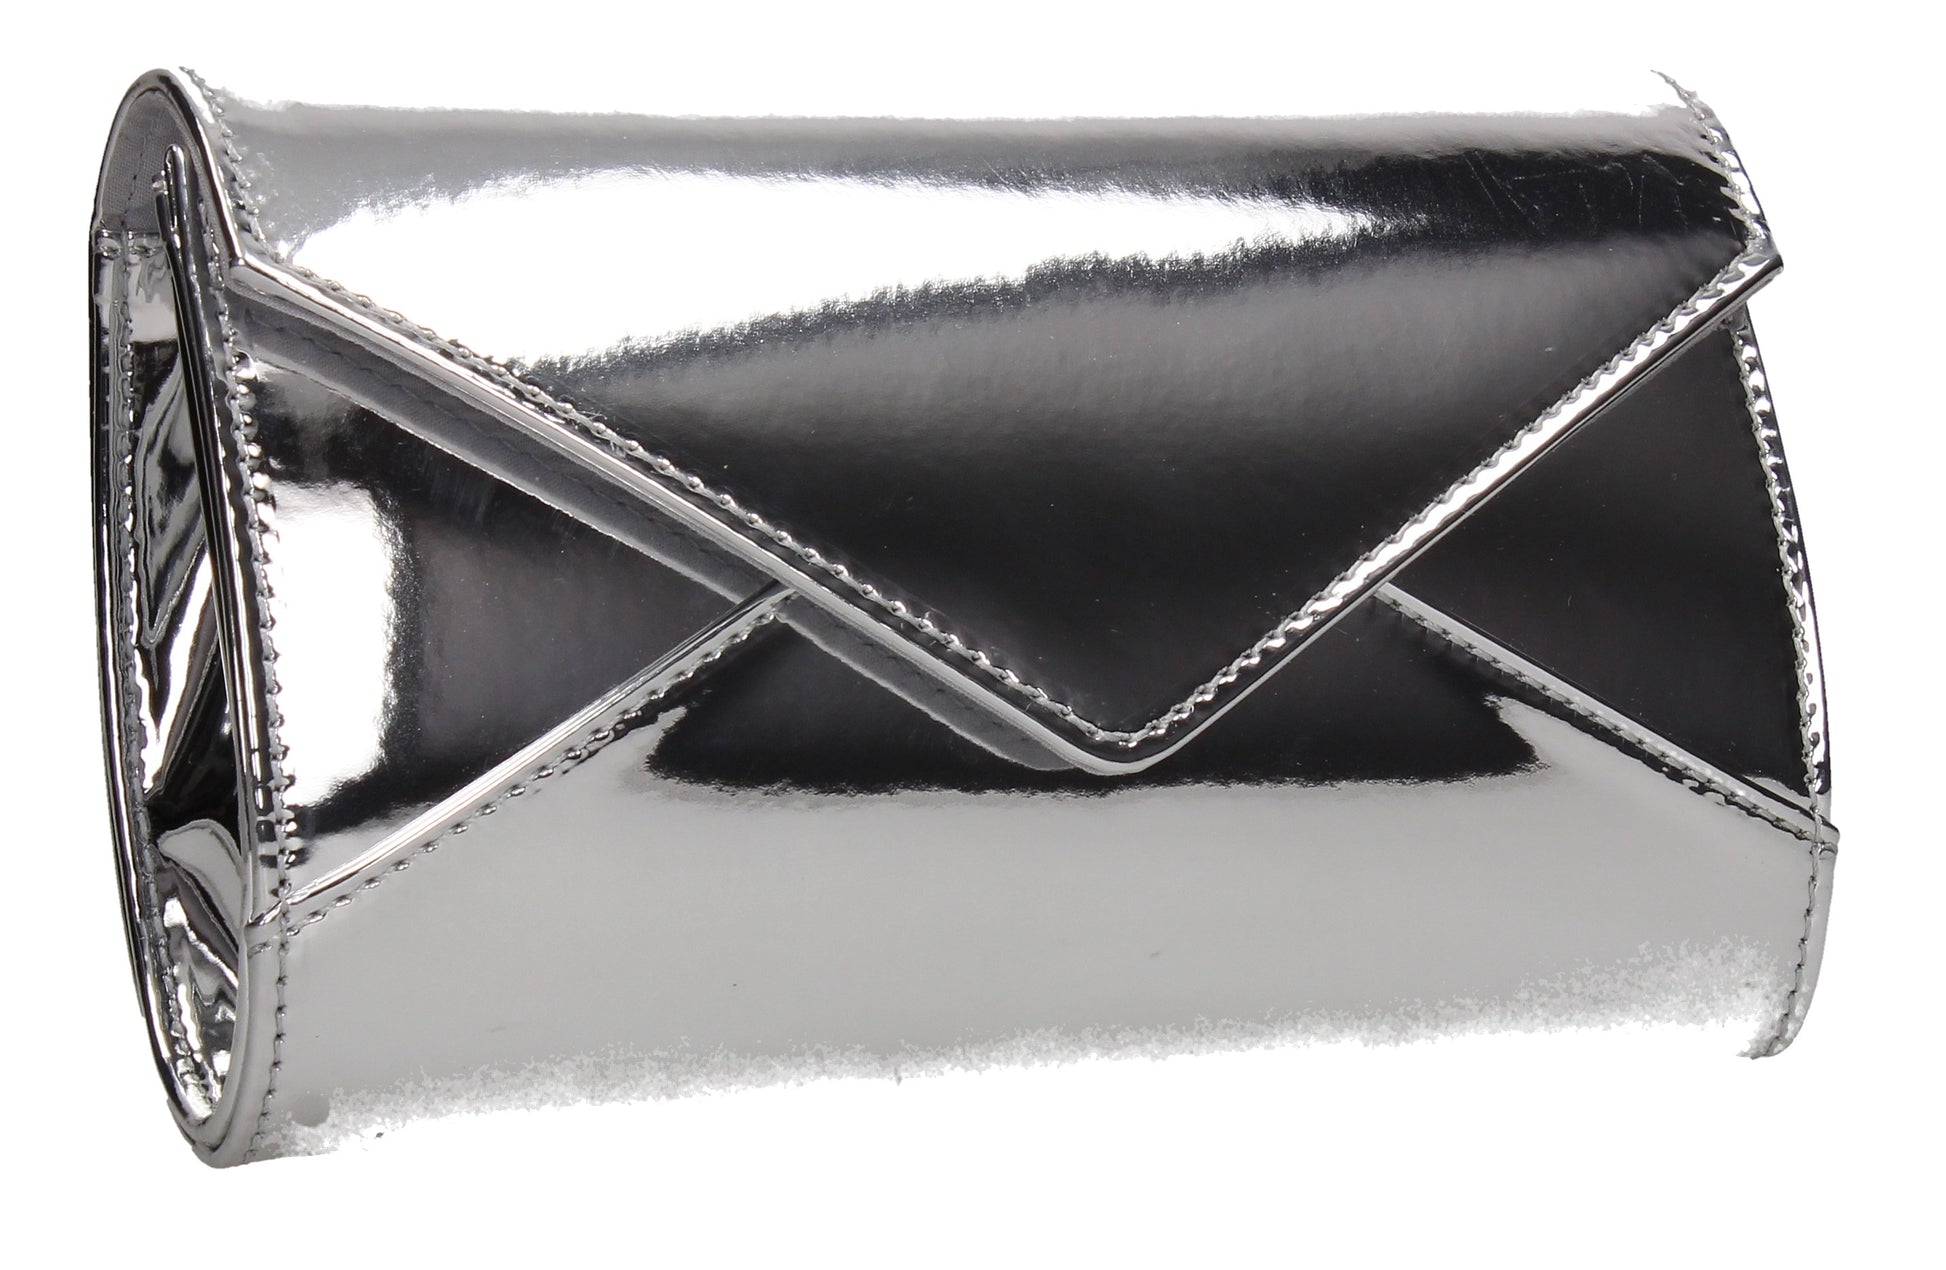 SWANKYSWANS Emely Patent Clutch Bag Silver Cute Cheap Clutch Bag For Weddings School and Work